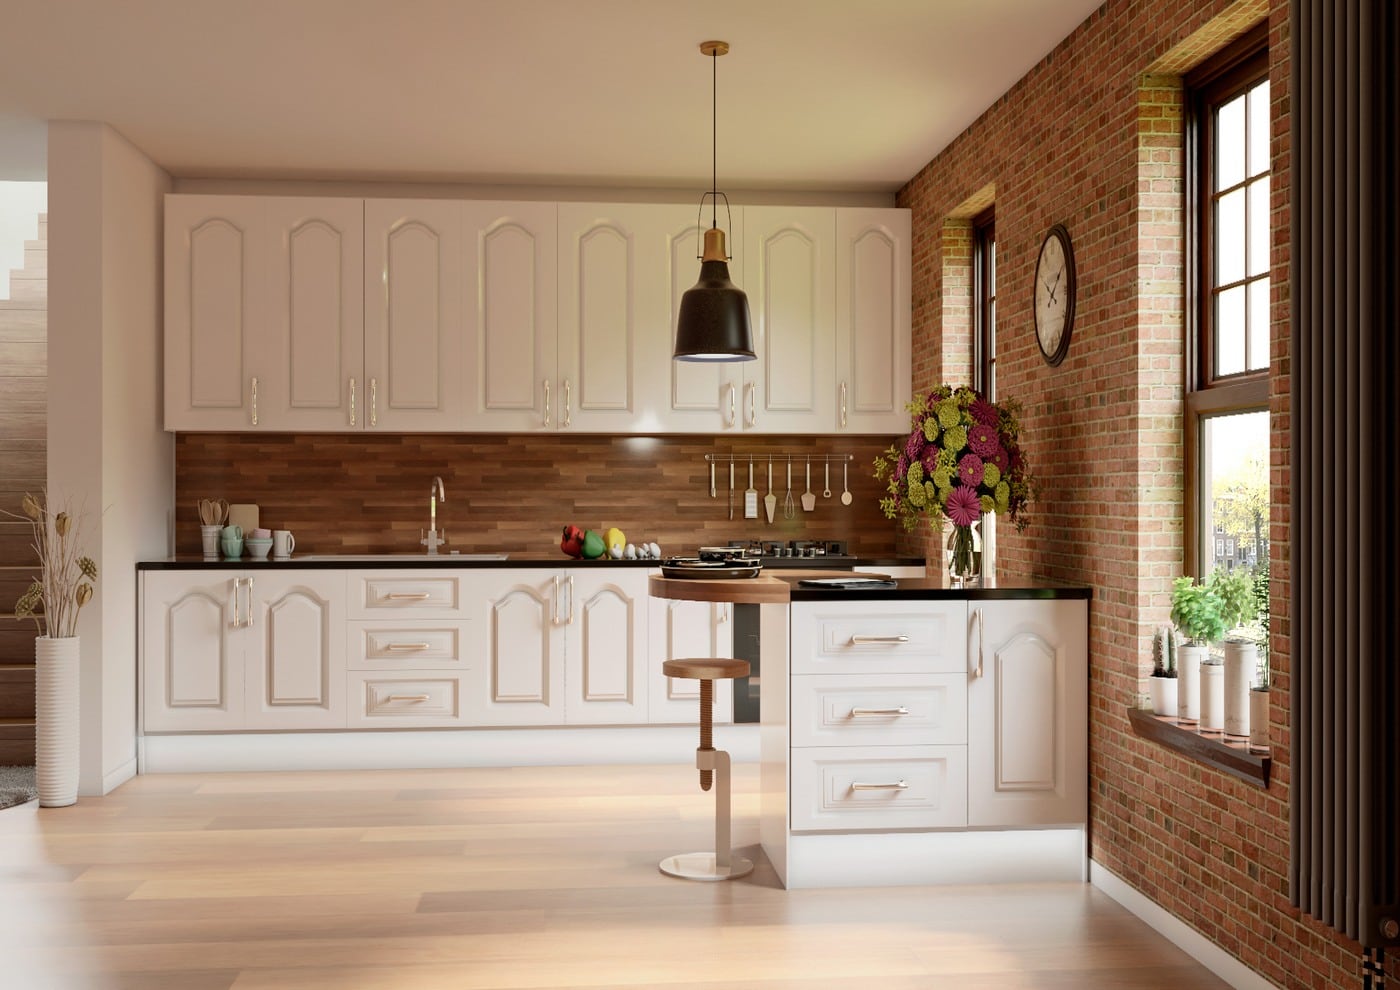 Sussex Kitchen Doors | High Gloss White | 50% off All Doors